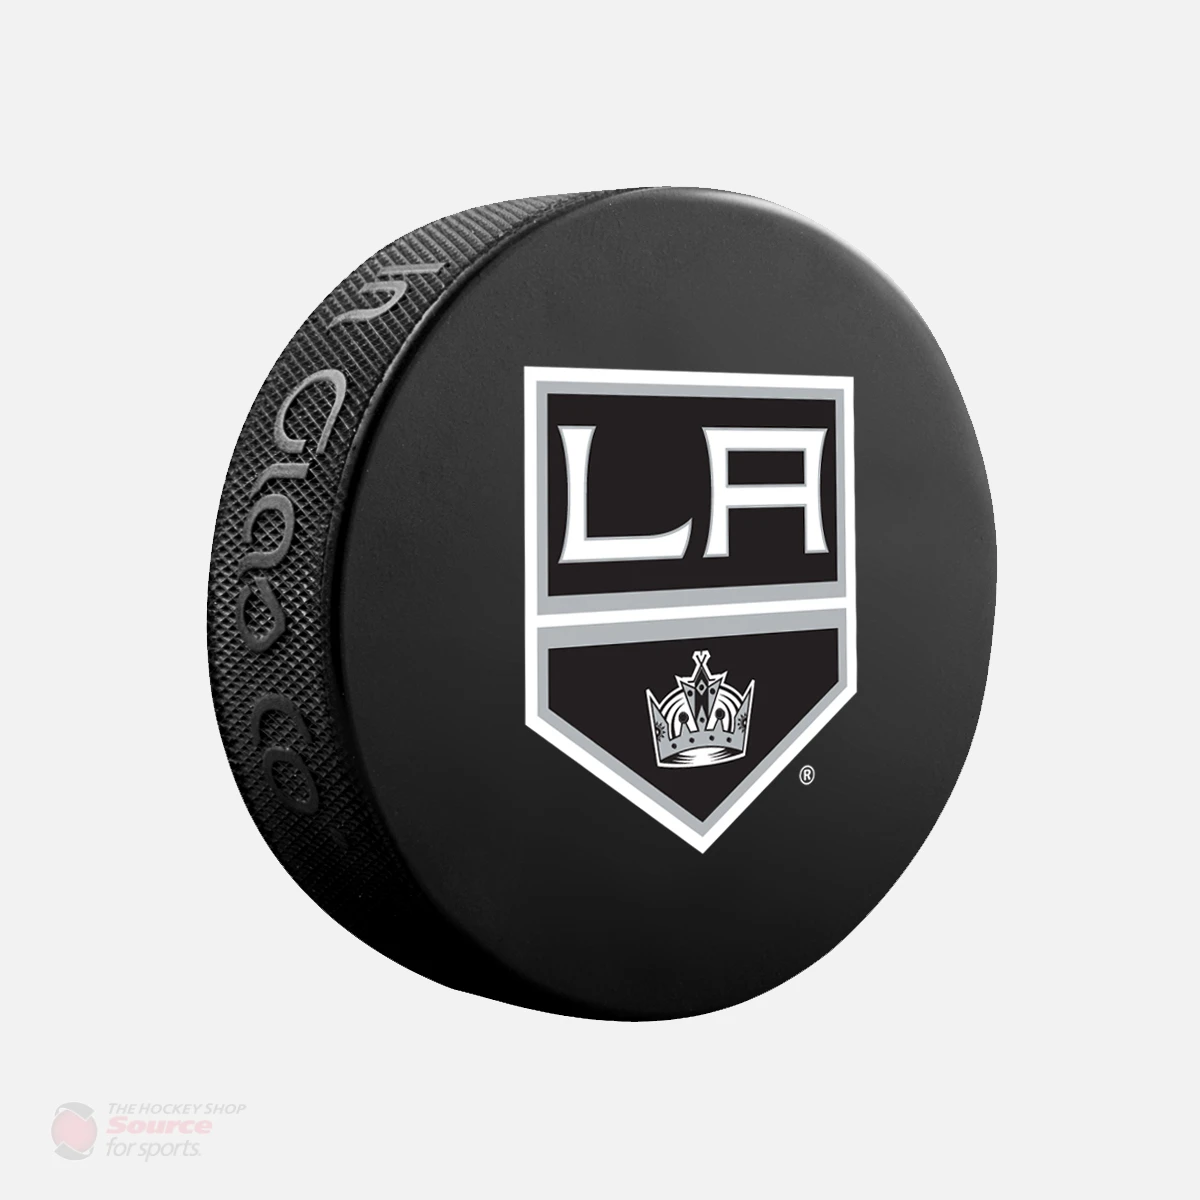 Los Angeles Kings Dwight King Official Black Old Time Hockey